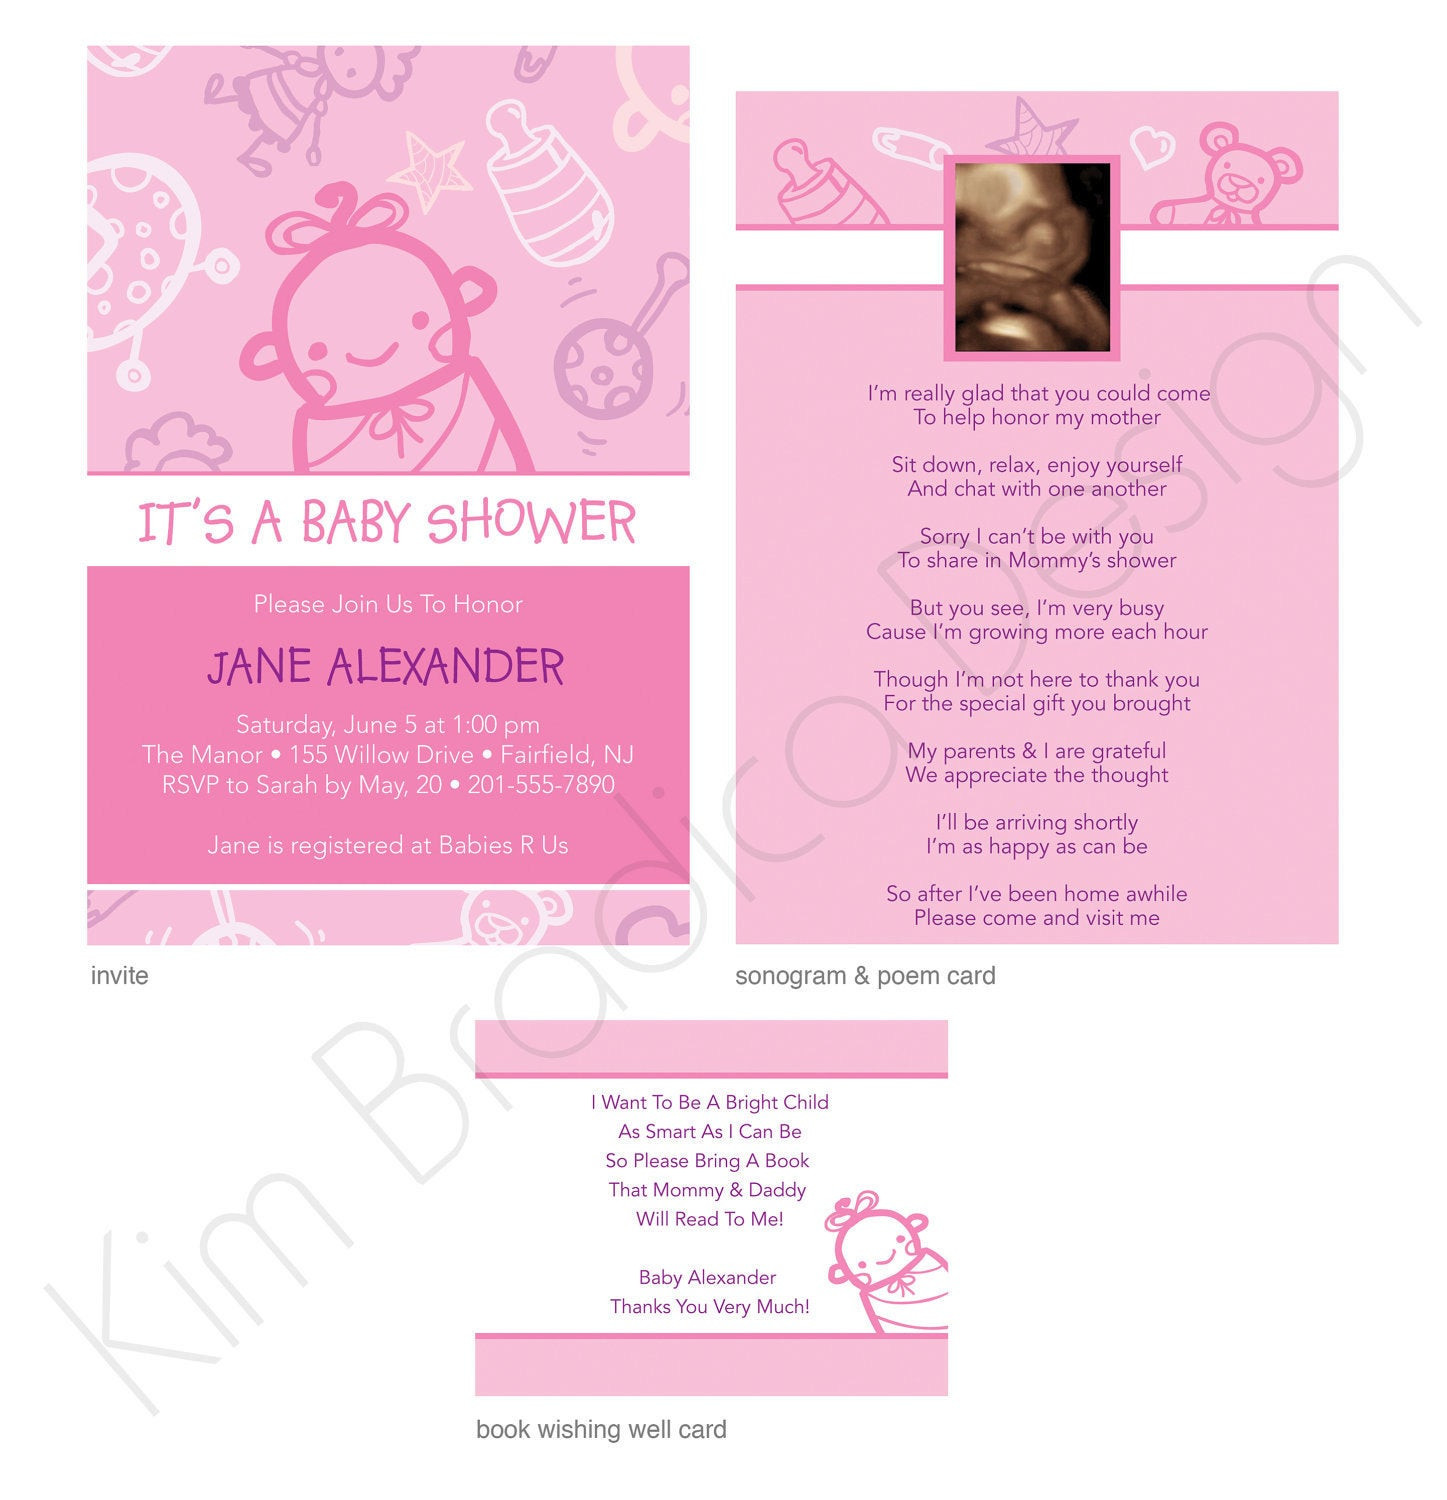 Baby Shower Wishing Well Quotes
 WISHING WELL QUOTES FOR BABY SHOWER Wroc awski